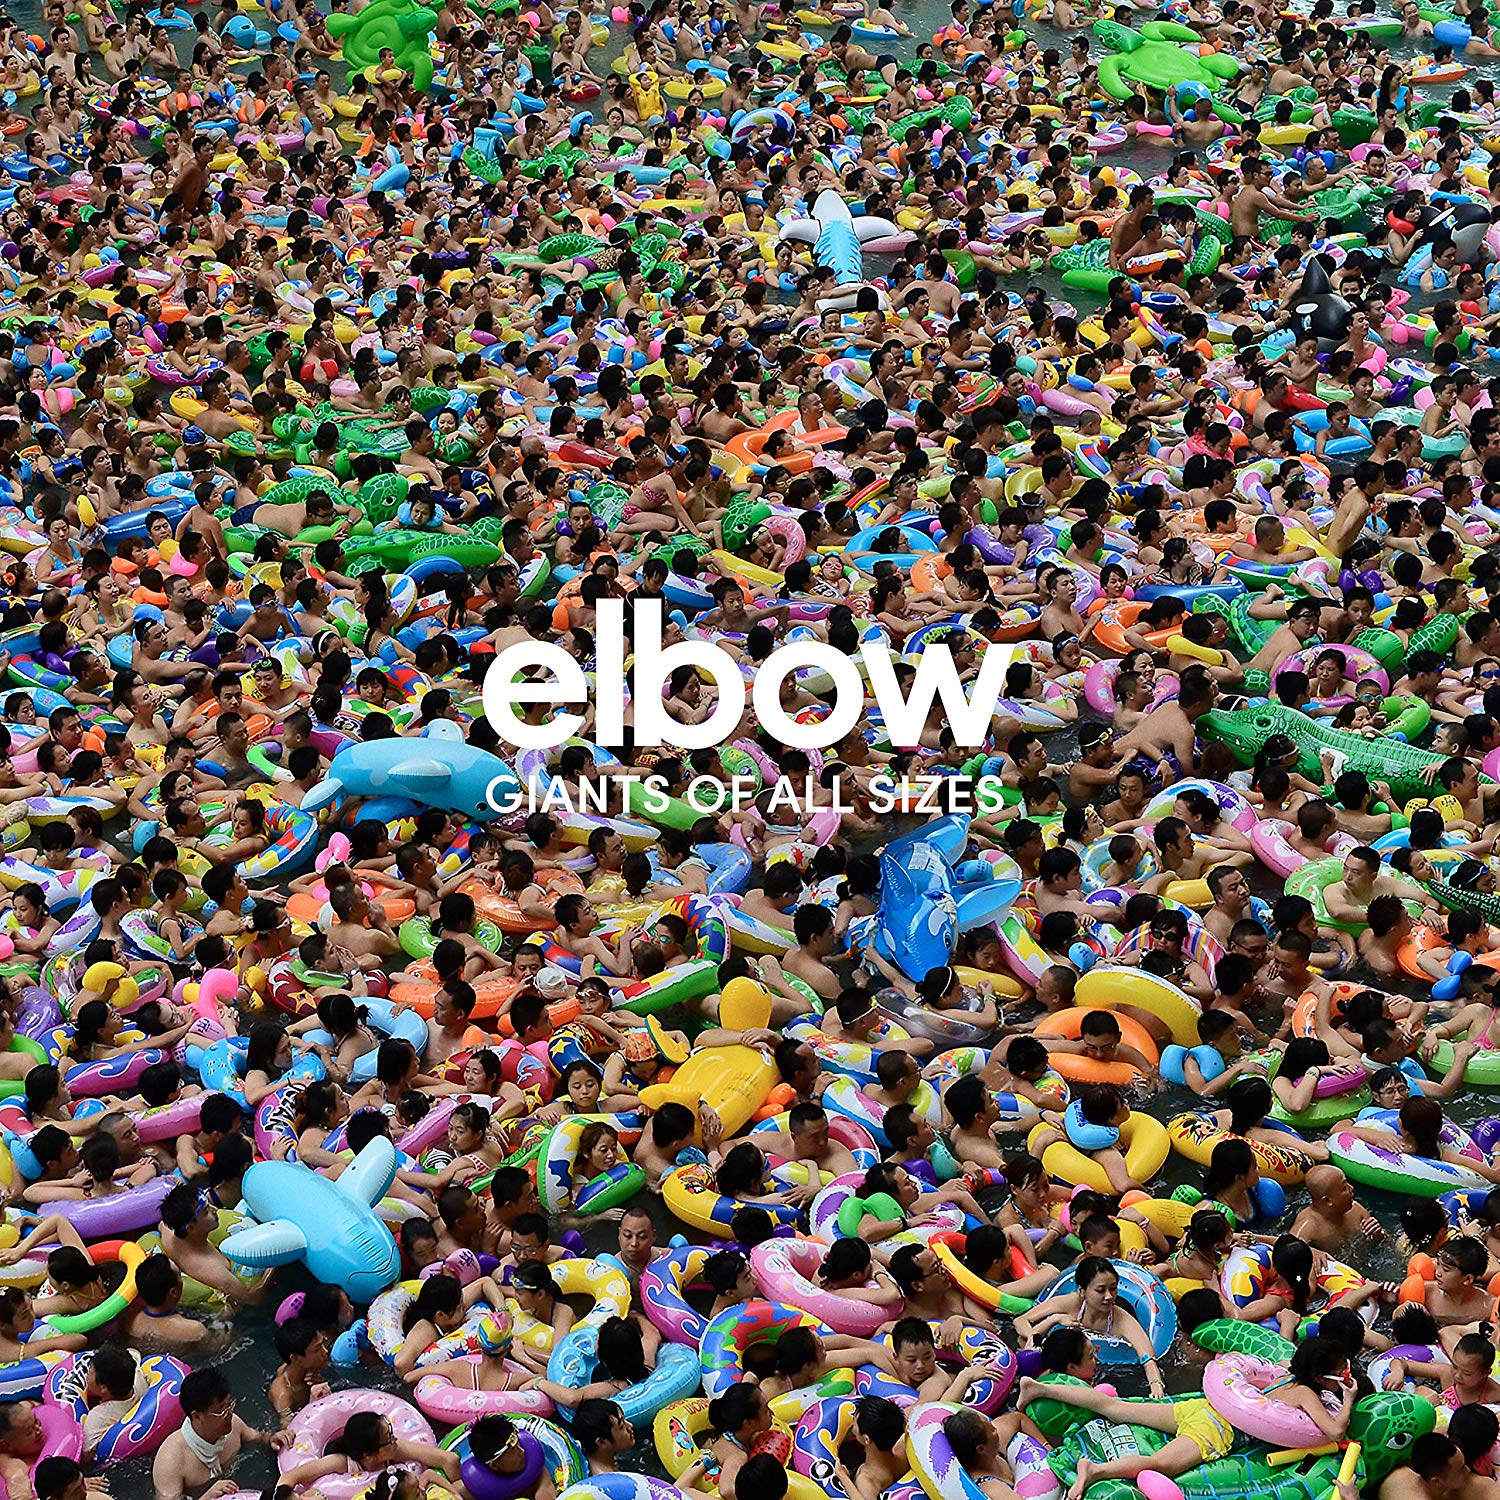 boom reviews - Elbow - Giants of All Sizes